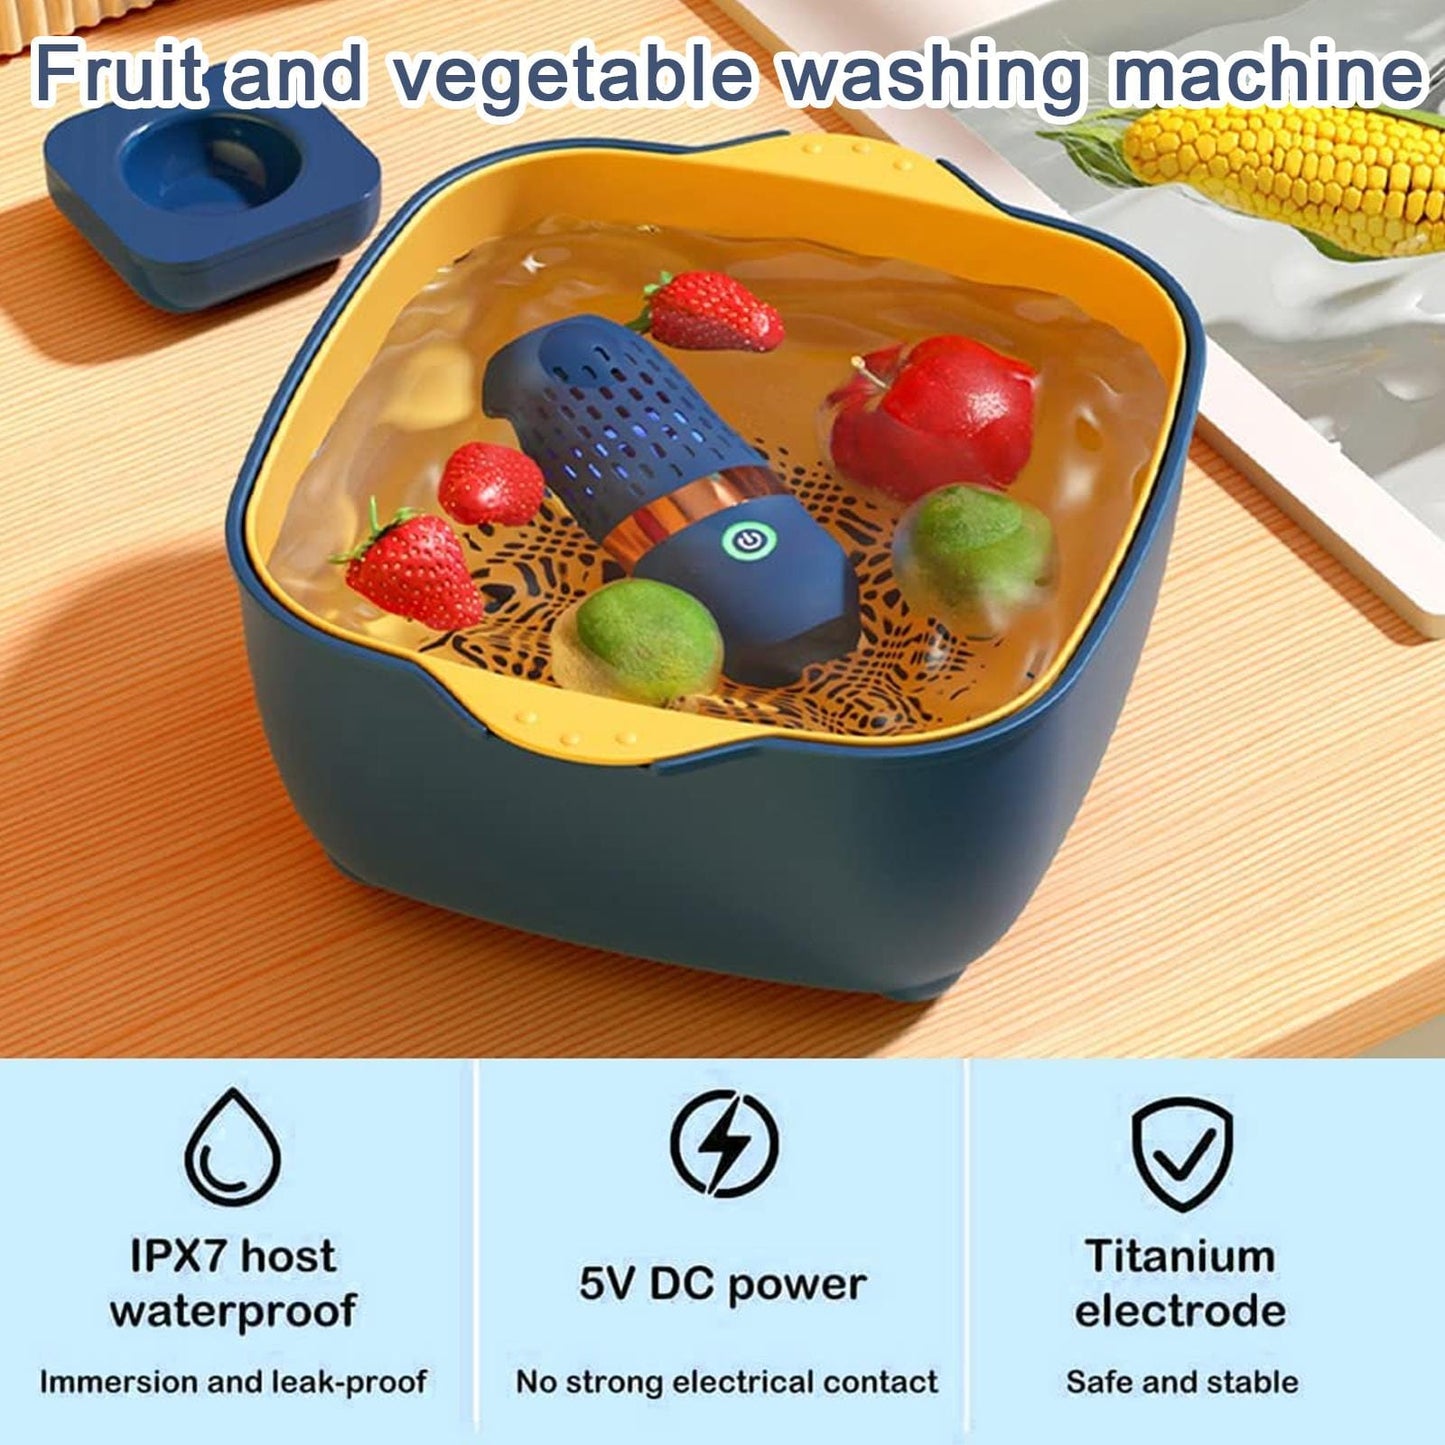 VeggiePure - The Ultimate Fruit & Vegetable Cleaning Machine